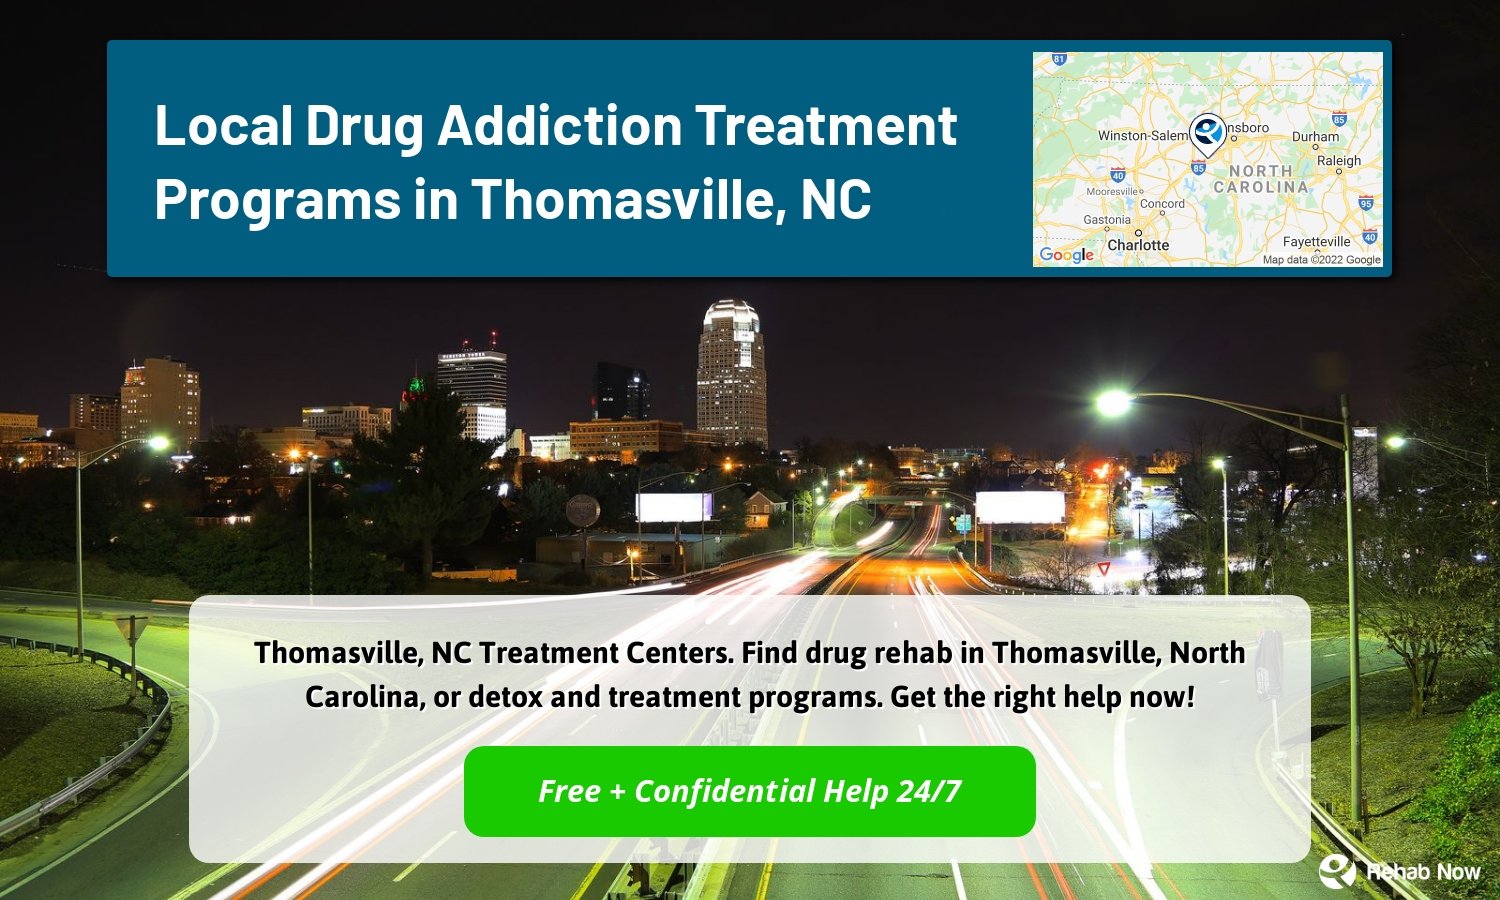 Thomasville, NC Treatment Centers. Find drug rehab in Thomasville, North Carolina, or detox and treatment programs. Get the right help now!